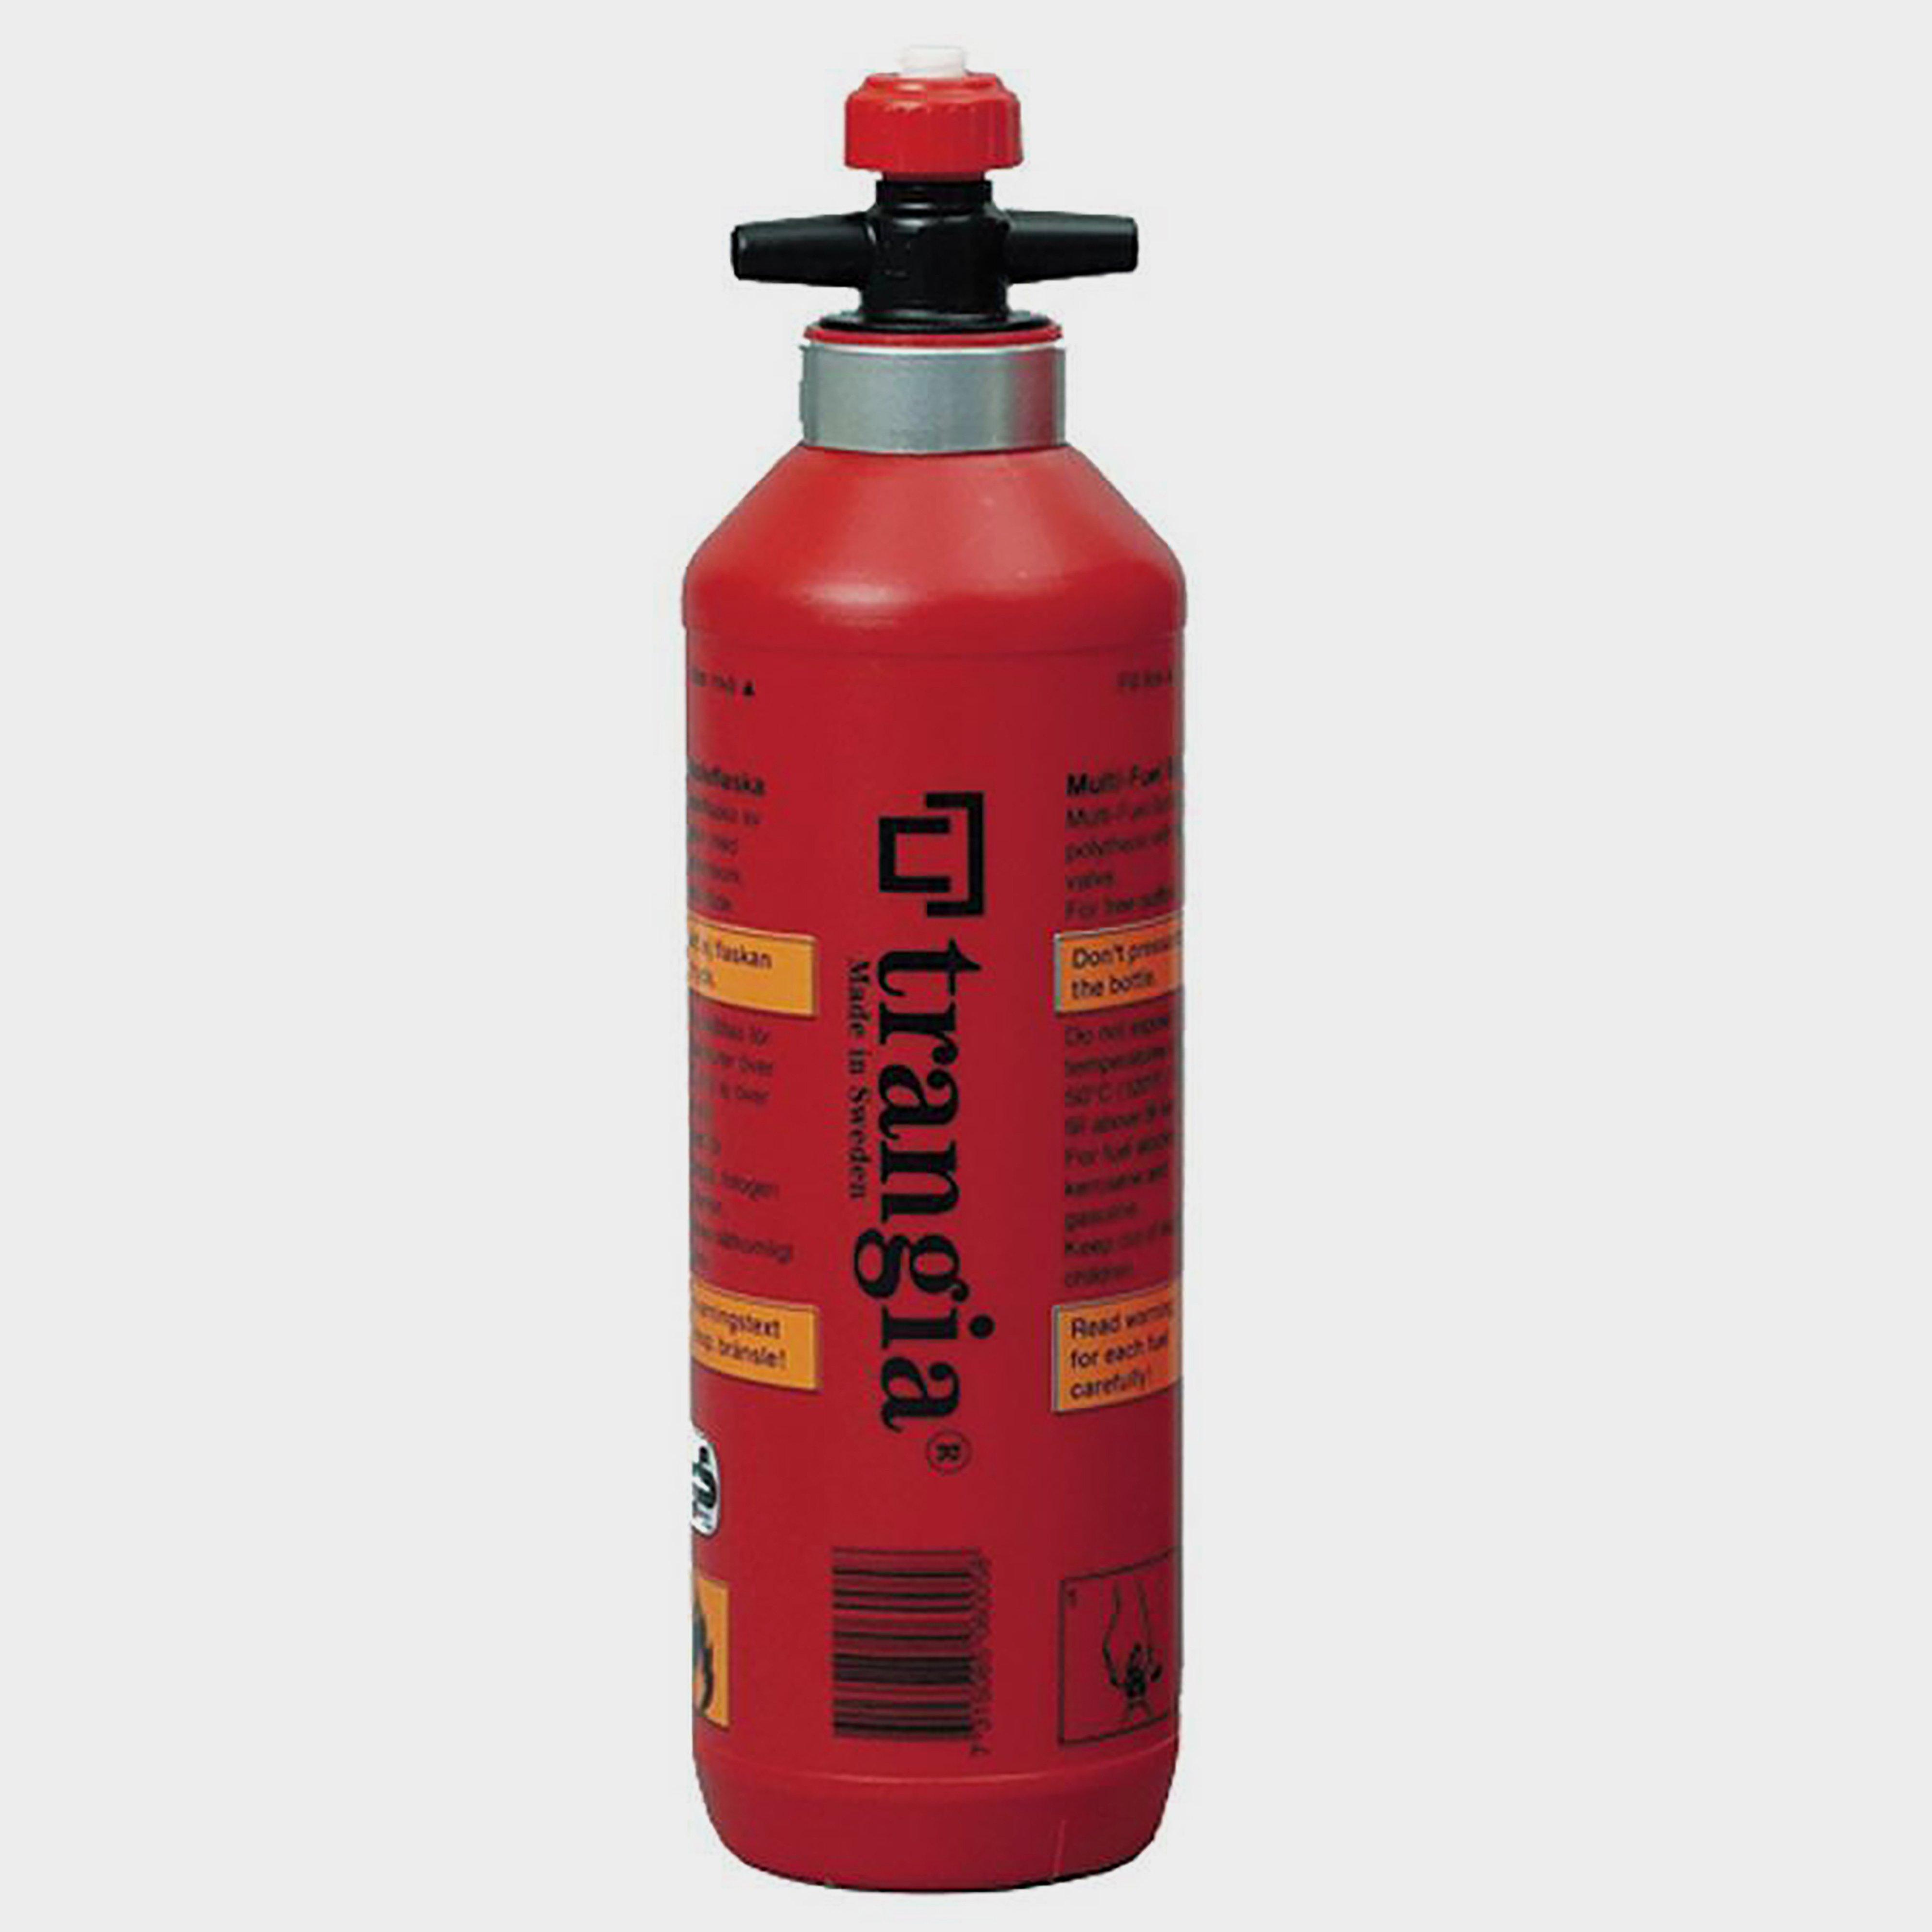 Trangia 1 Litre Fuel Bottle - Red  Red